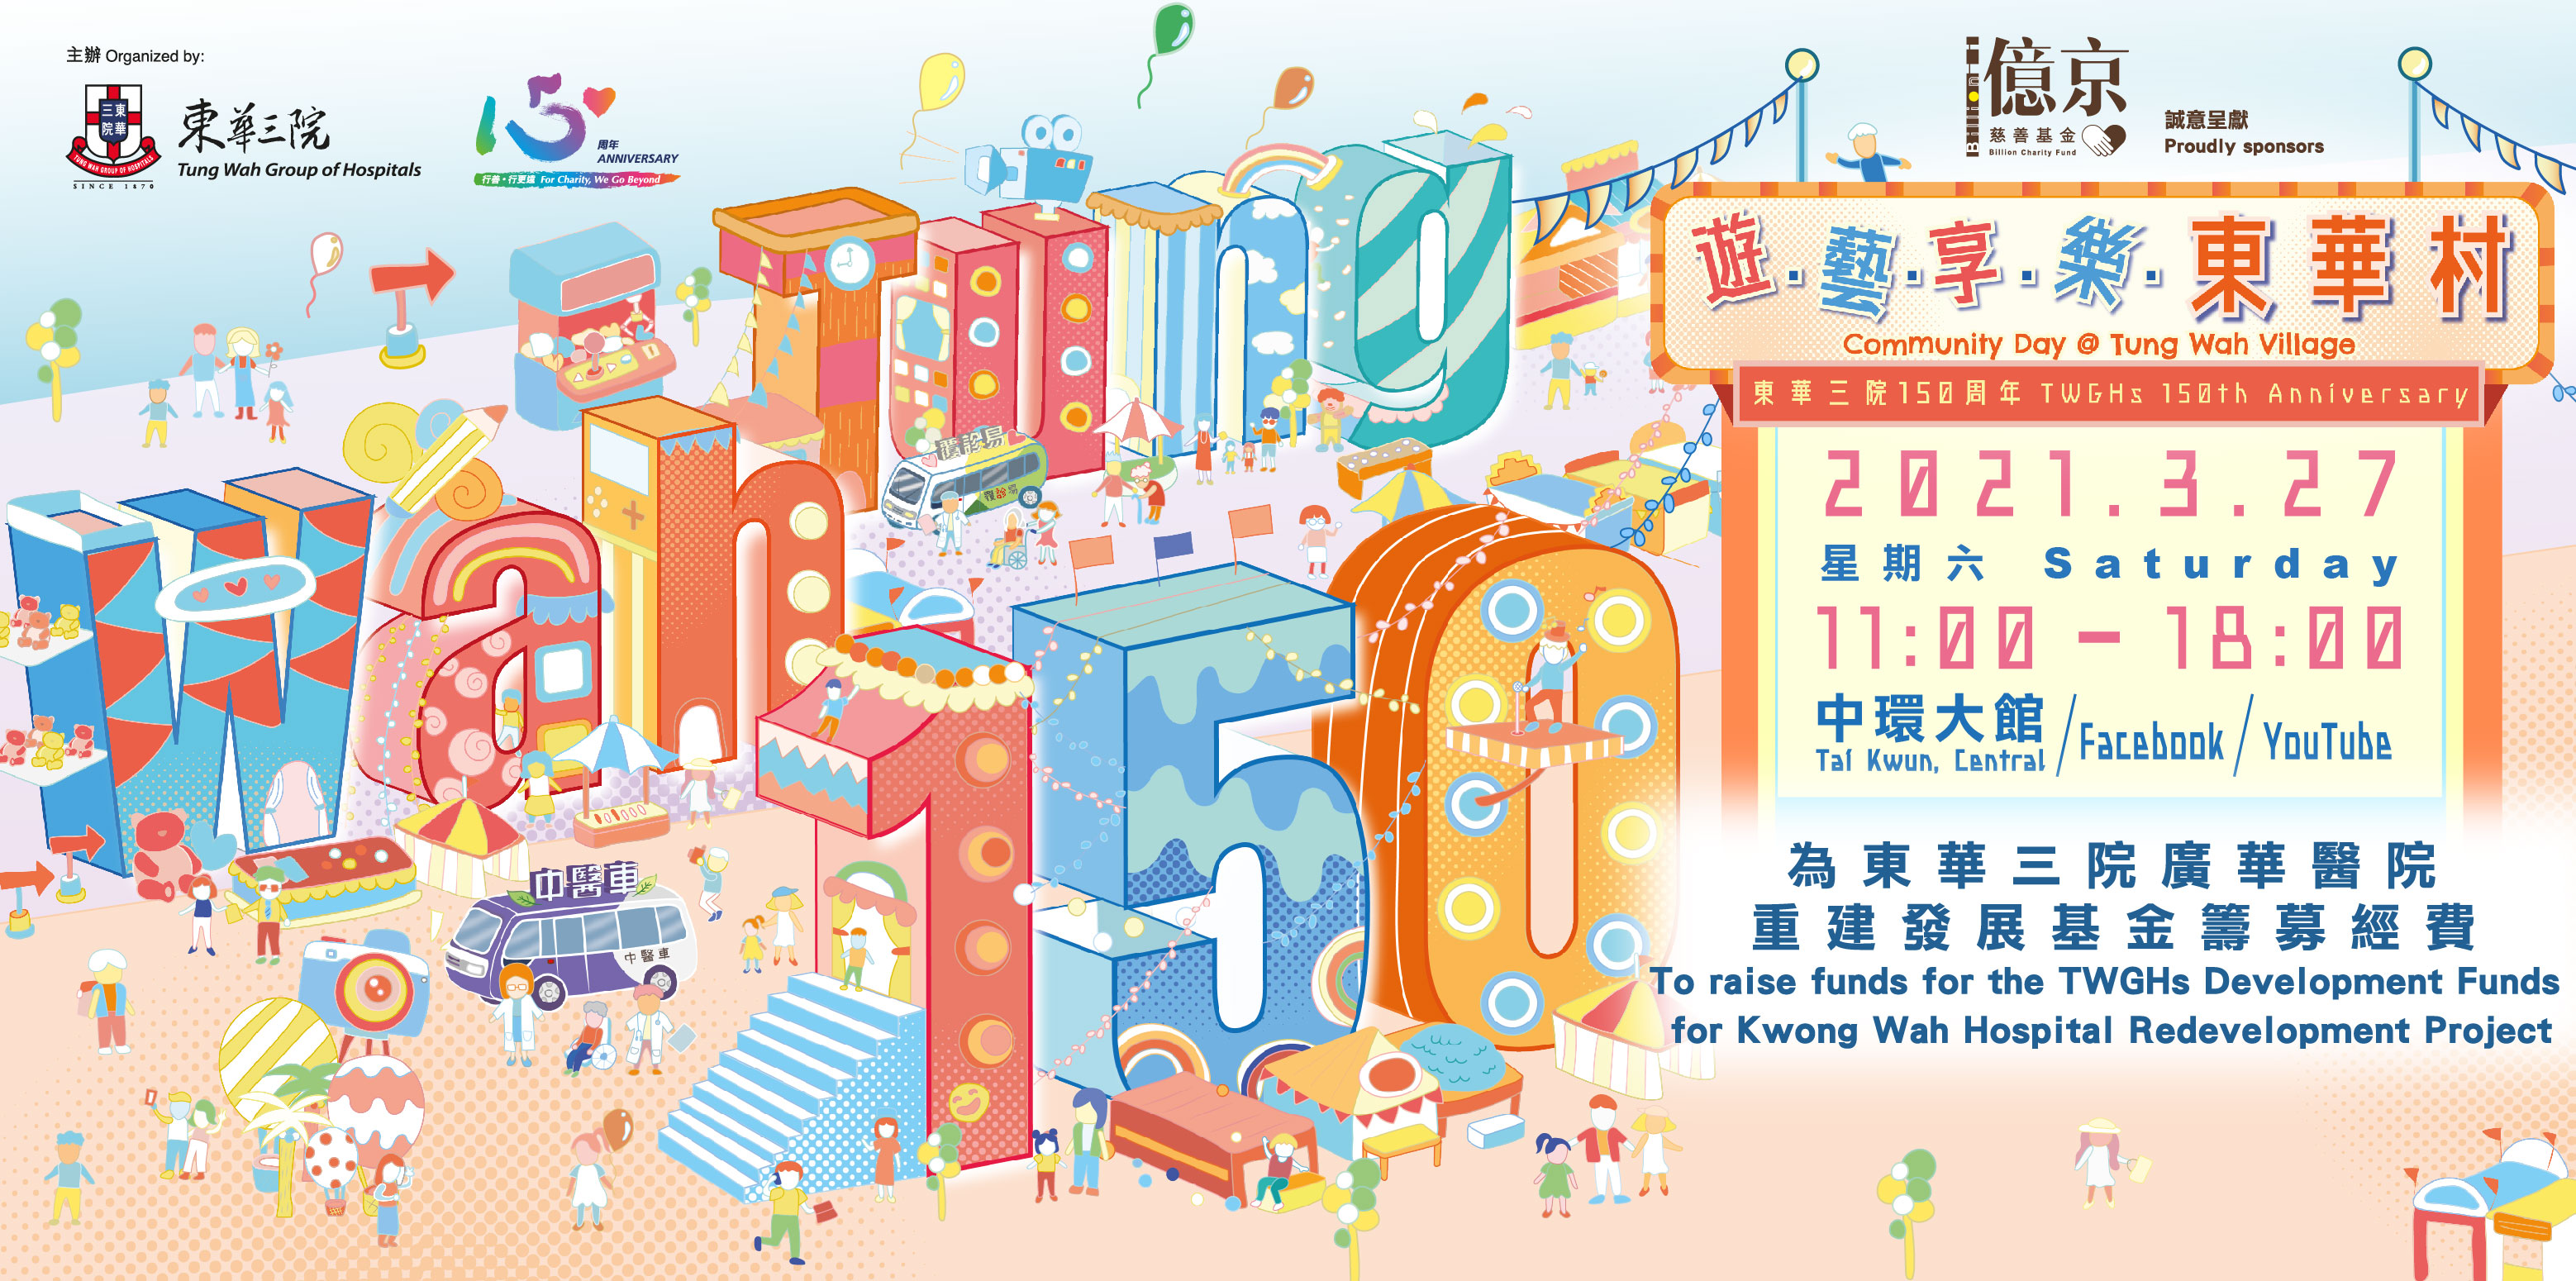 Billion Charity Fund Proudly sponsors: TWGHs 150th Anniversary Community Day @ Tung Wah Village